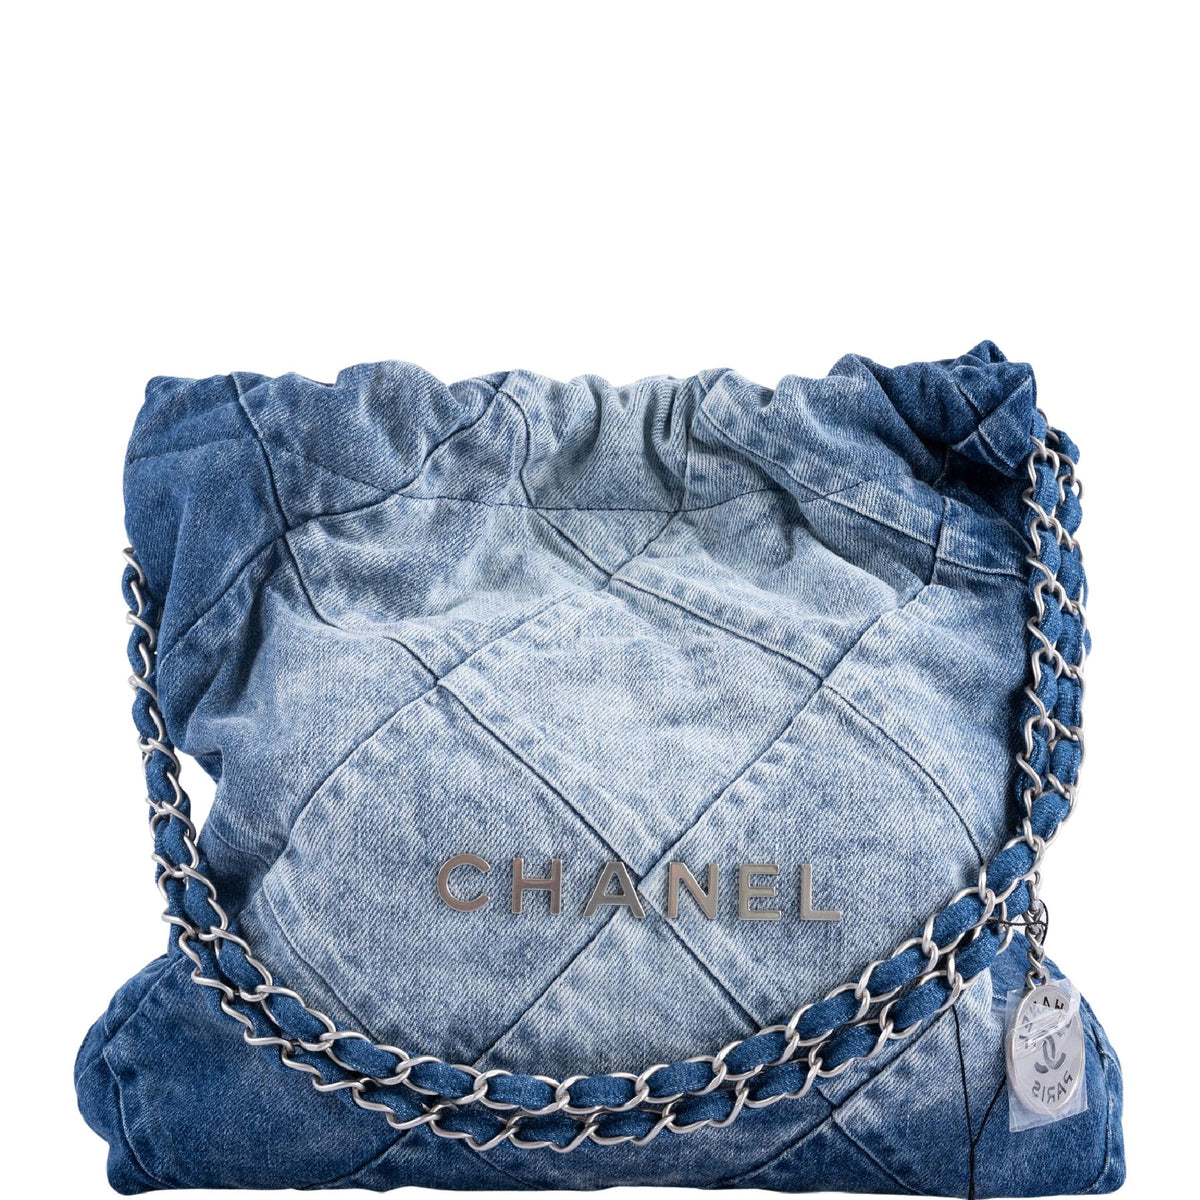 Chanel Large 22 Bag Faded Blue Denim Silver Hardware in 2023